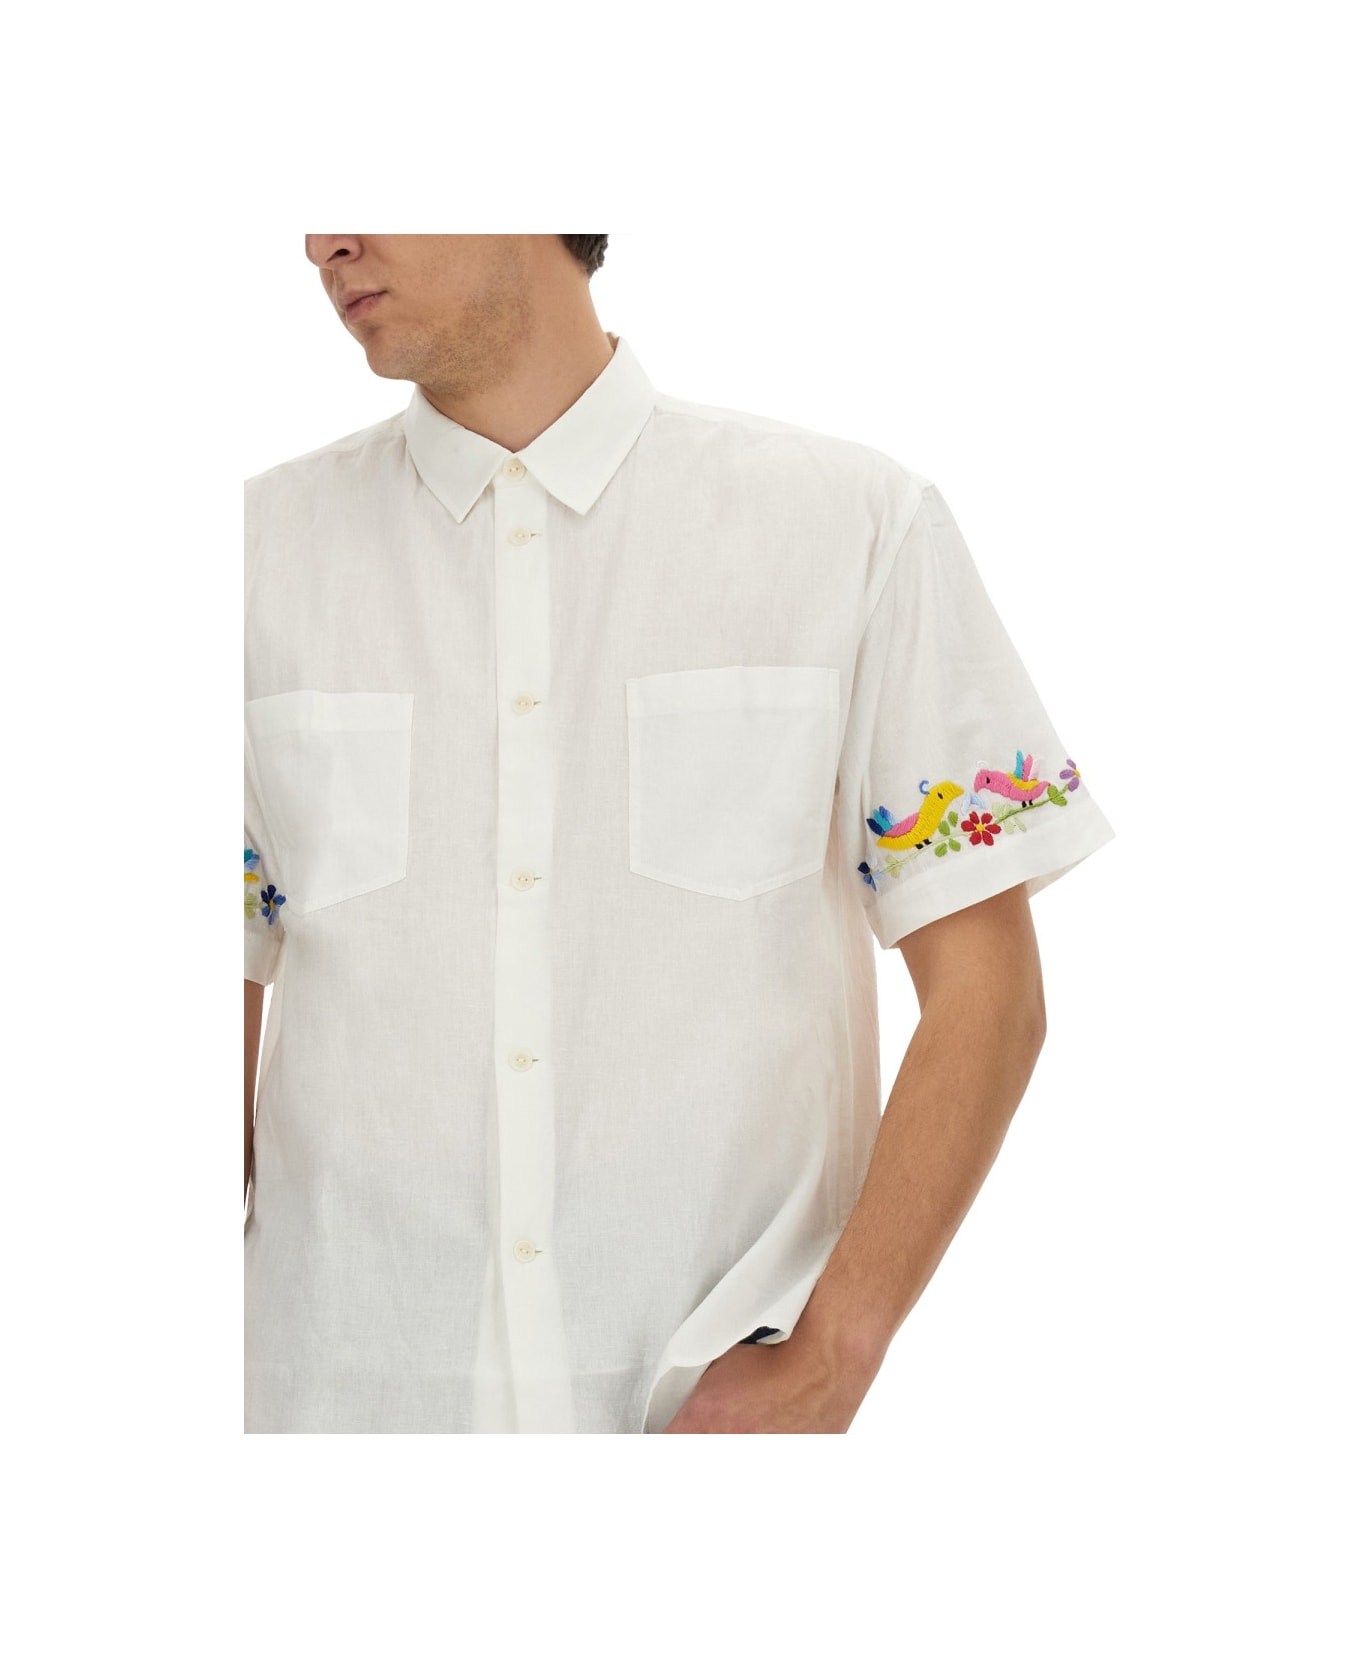 YMC Shirt With Embroidery - POWDER